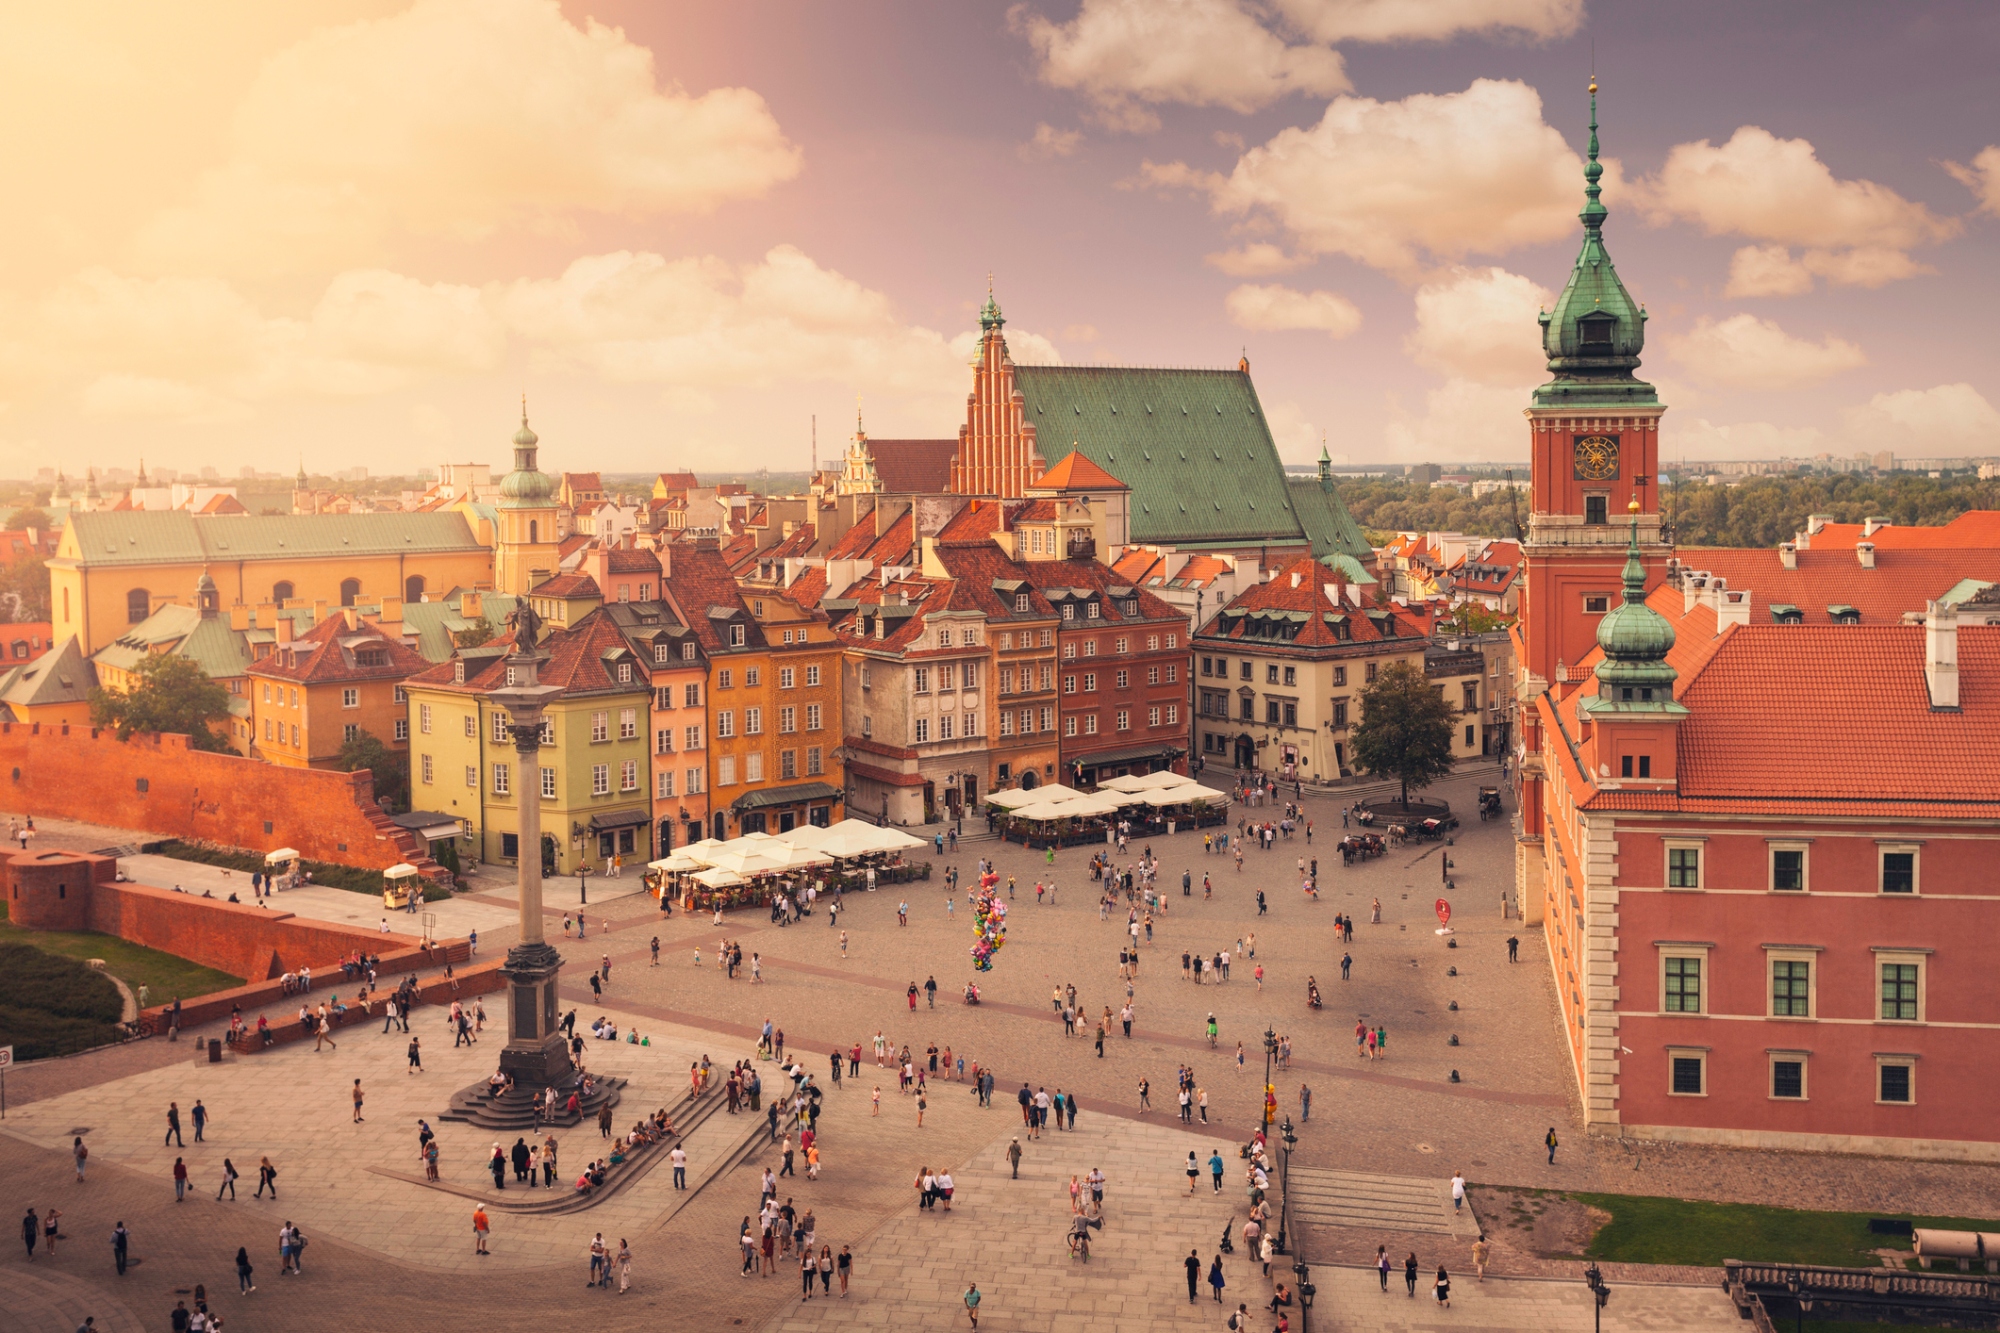 View over Castle Square at the old town of Warsaw. The historic center of Warsaw is a UNESCO world heritage site.